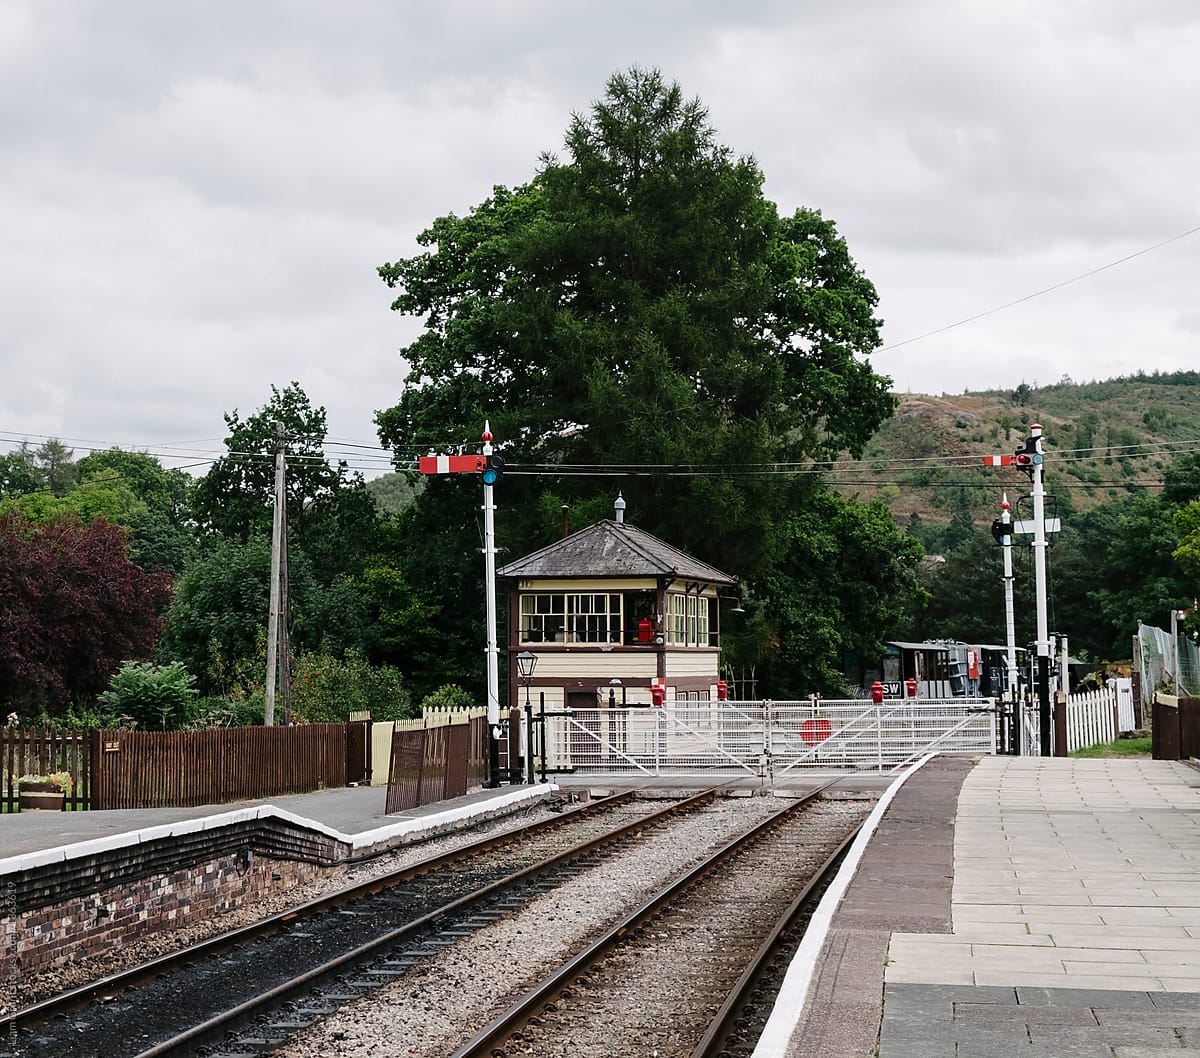 Signal box and road crossing on a heritage railway line. Wales,